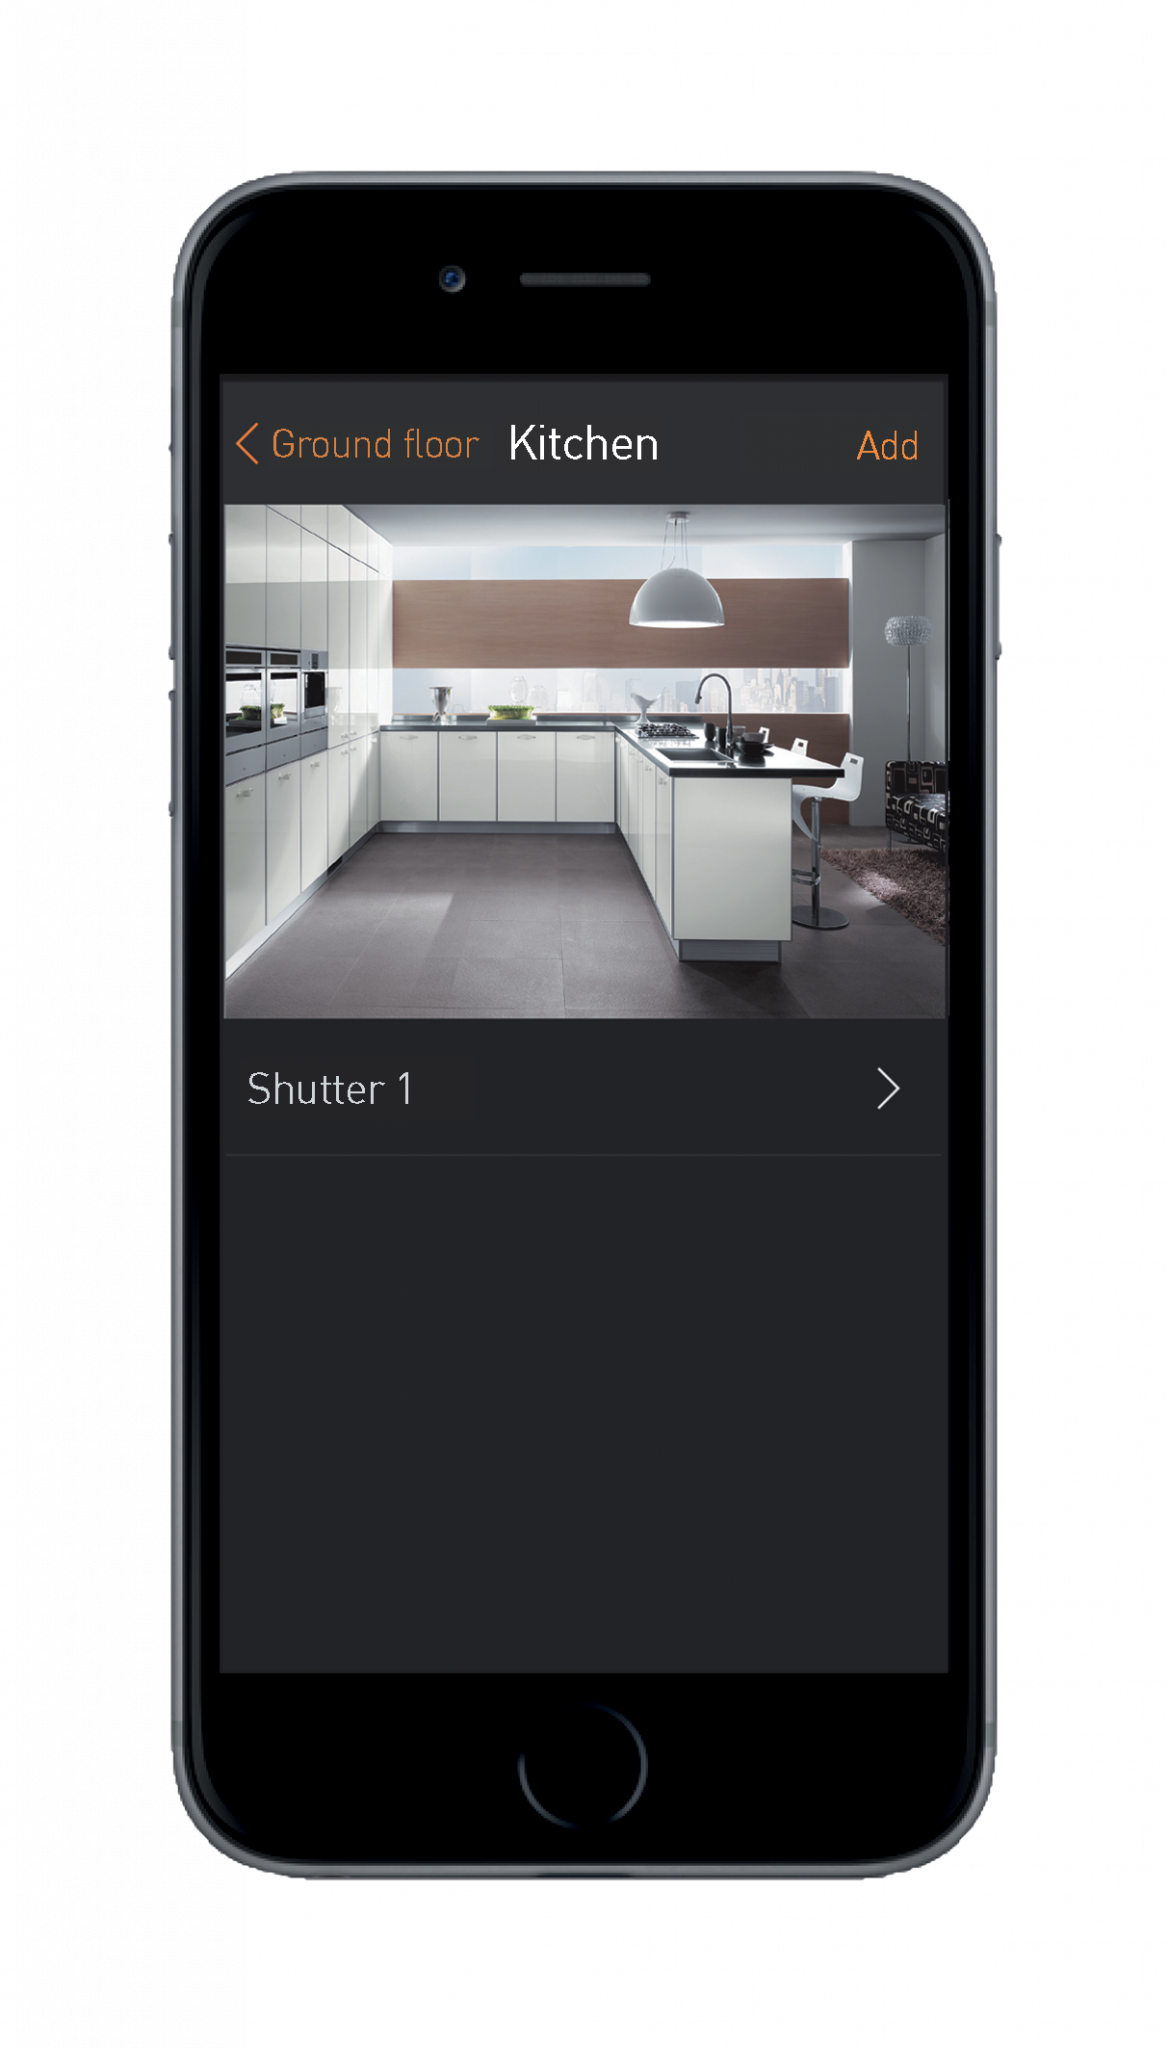 Legrand unveils next-generation home automation system complete with dedicated app for easy set-up and control @LegrandUK